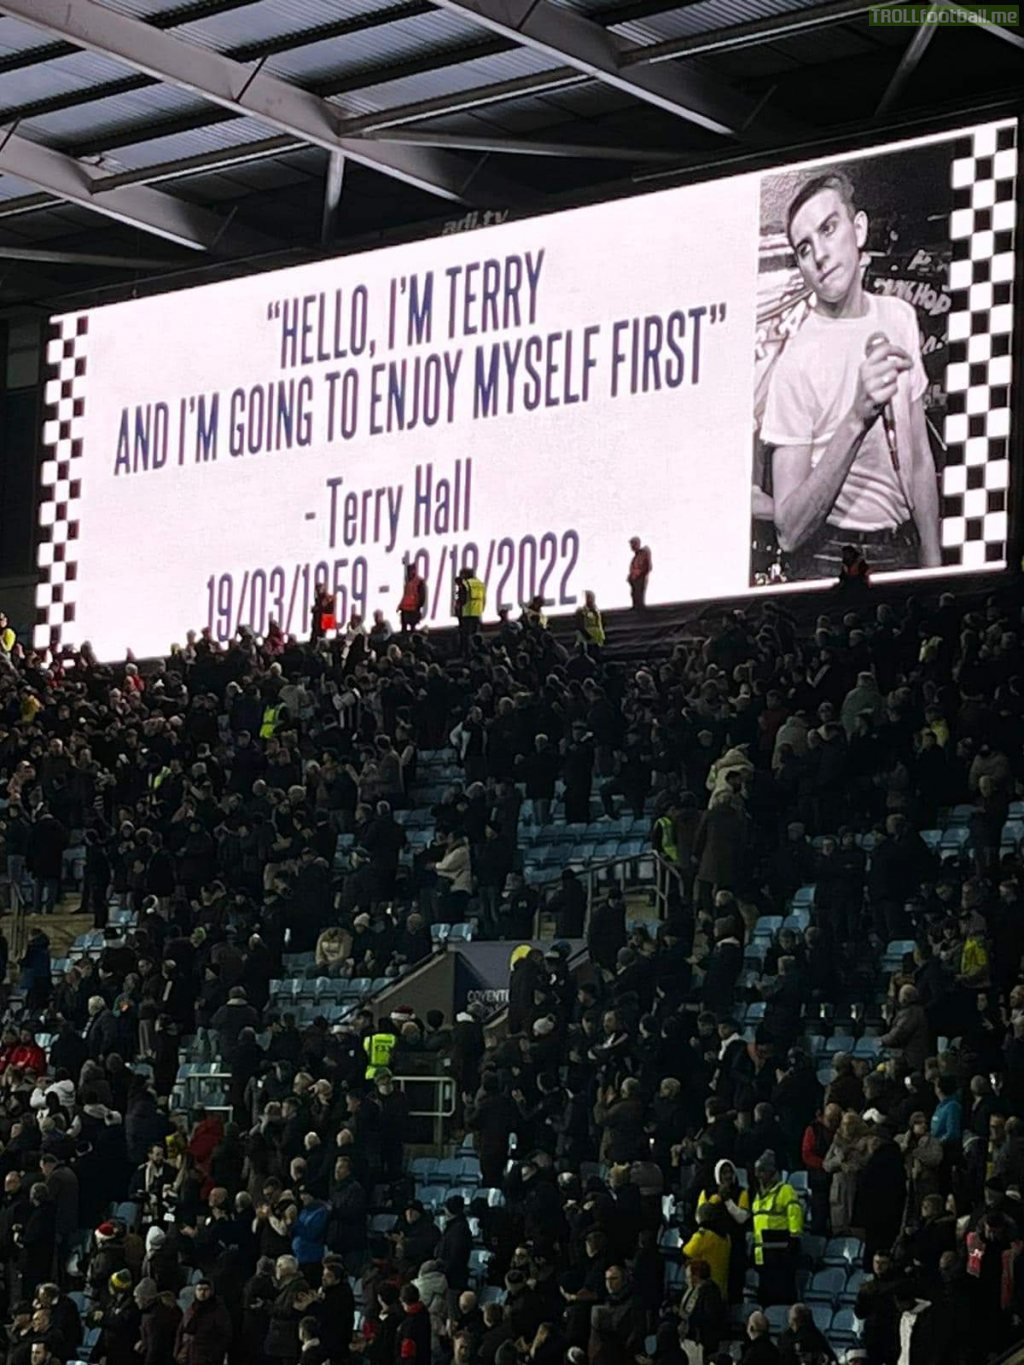 Tribute tonight for Terry Hall at the Coventry v West Brom game.